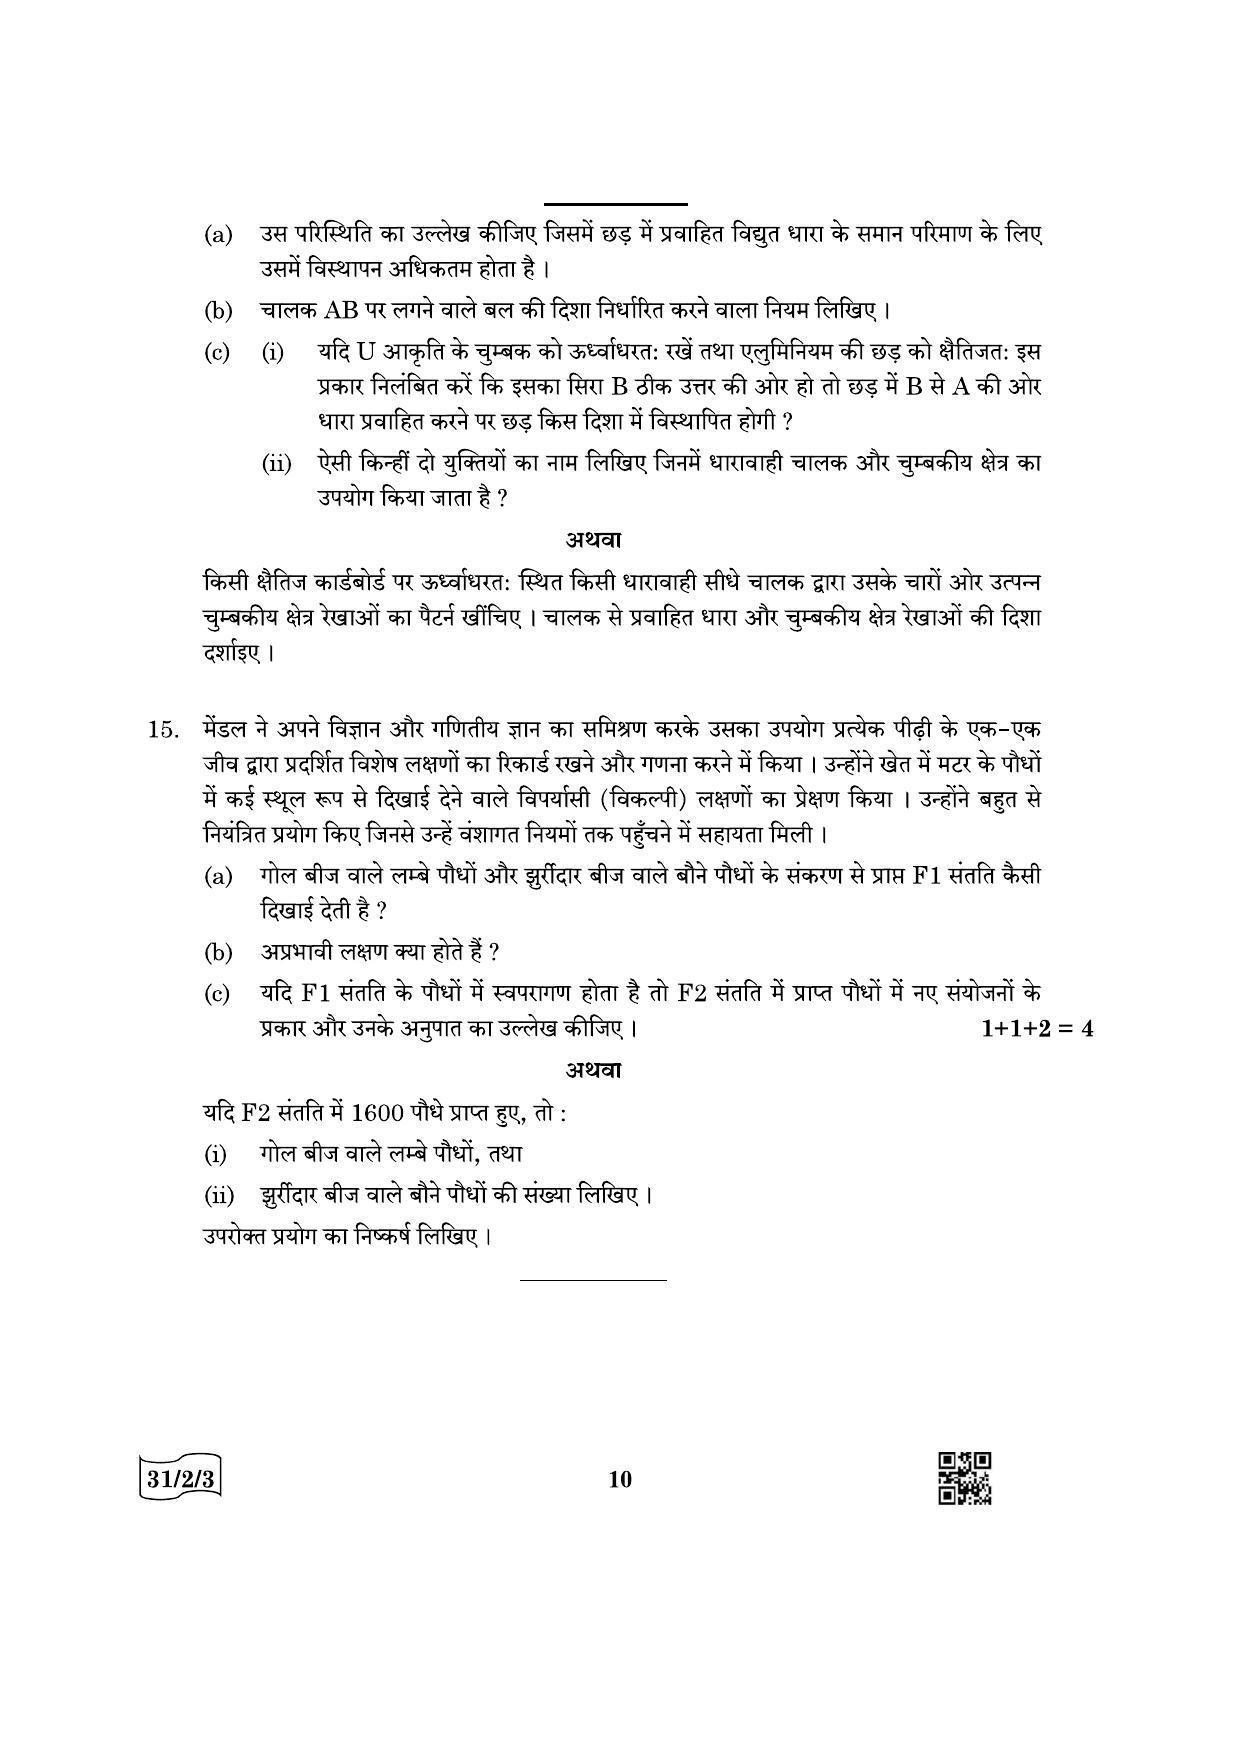 CBSE Class 10 31-2-3 Science 2022 Question Paper - Page 10